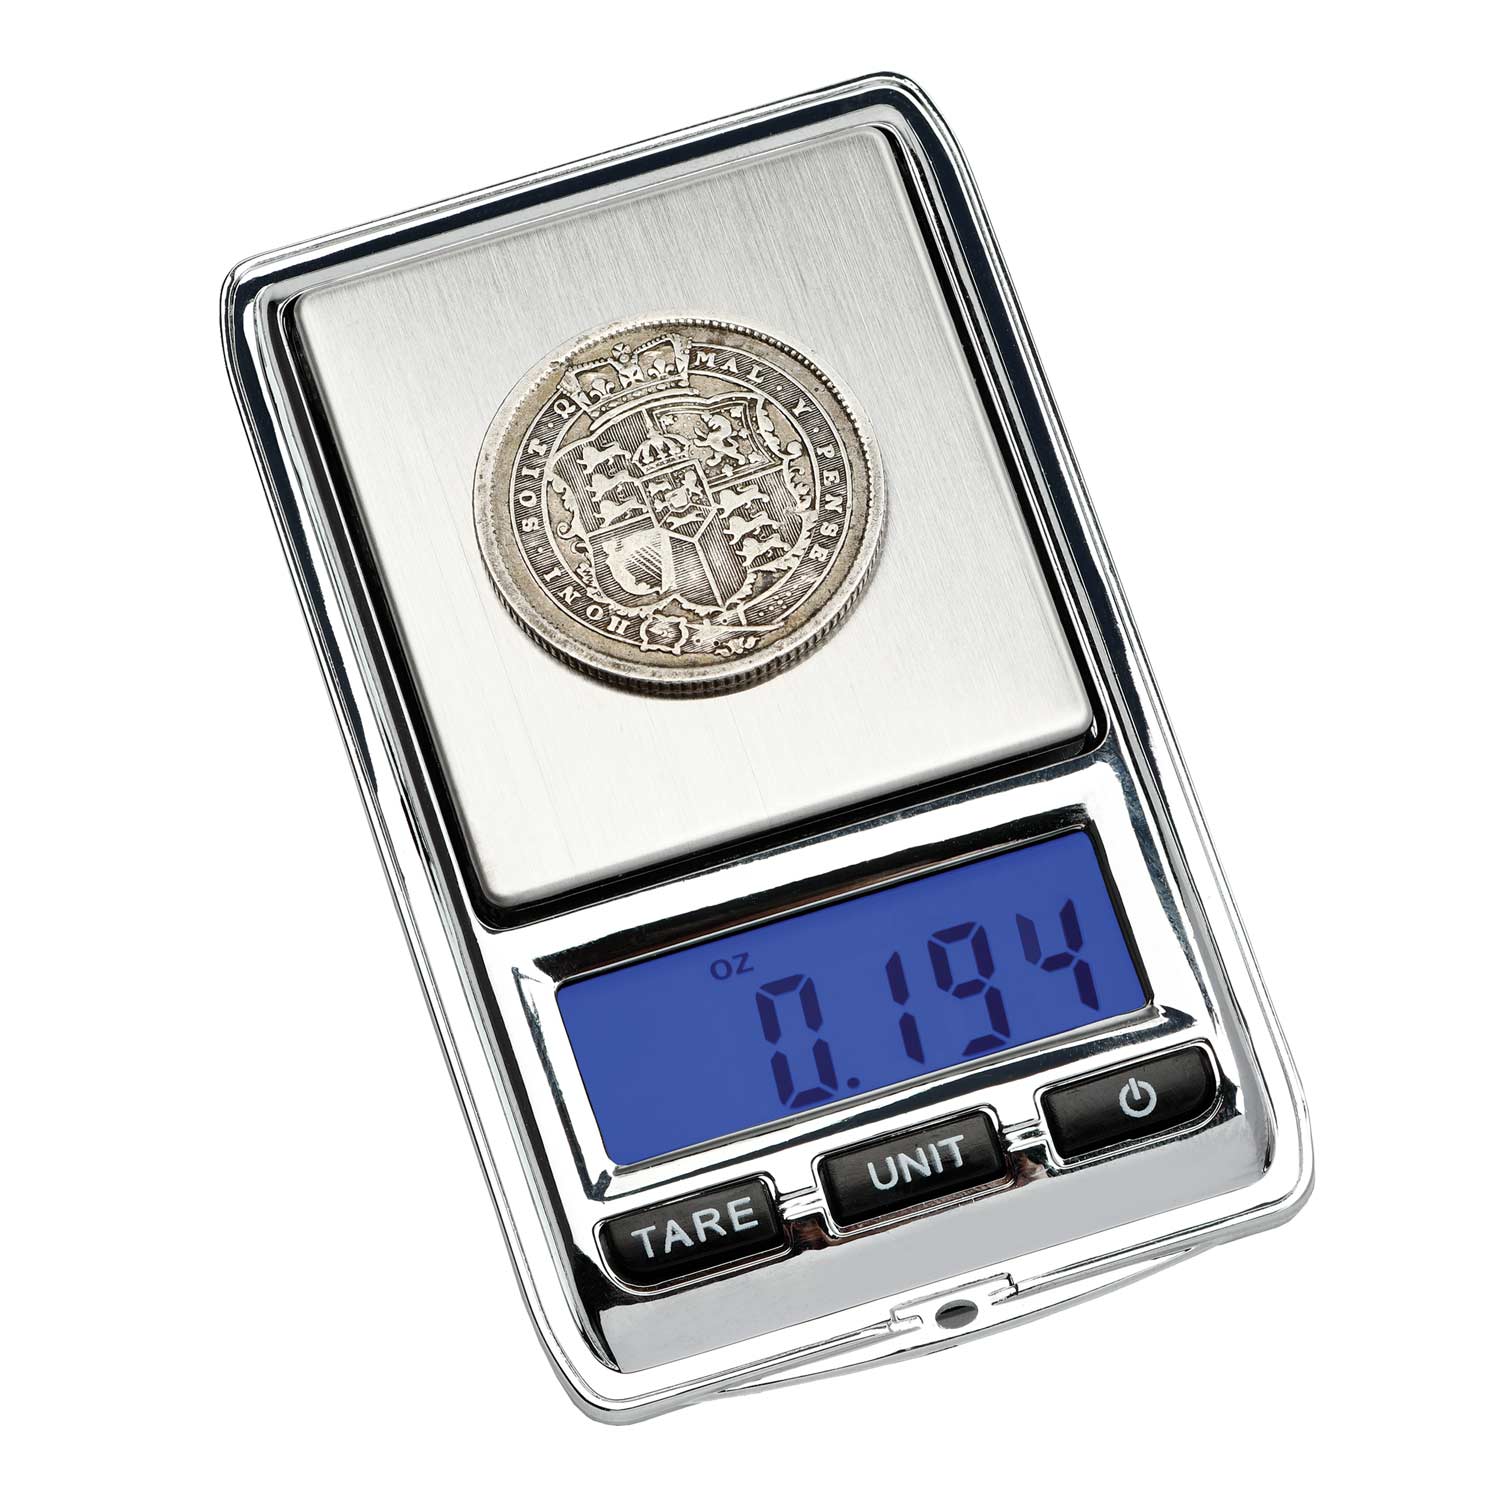 https://www.royalmint.com/globalassets/the-royal-mint/images/pages/shop/ranges/historics/ancillaries/products-imgs/hisamdcs-mini-digital-coin-scale-with-coin.jpg